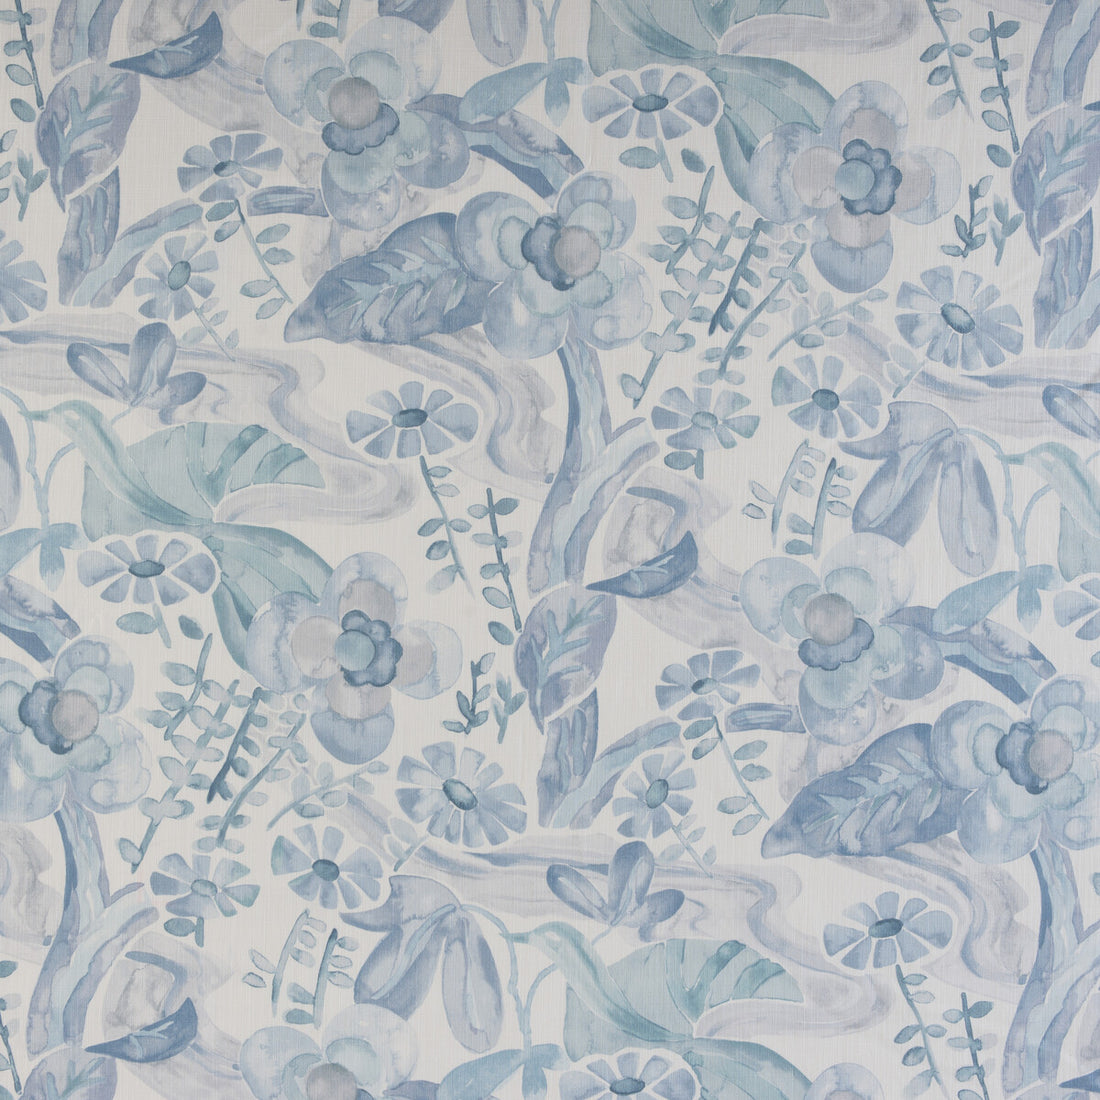 Faerie fabric in pacific color - pattern FAERIE.15.0 - by Kravet Design in the Barbara Barry Home Midsummer collection